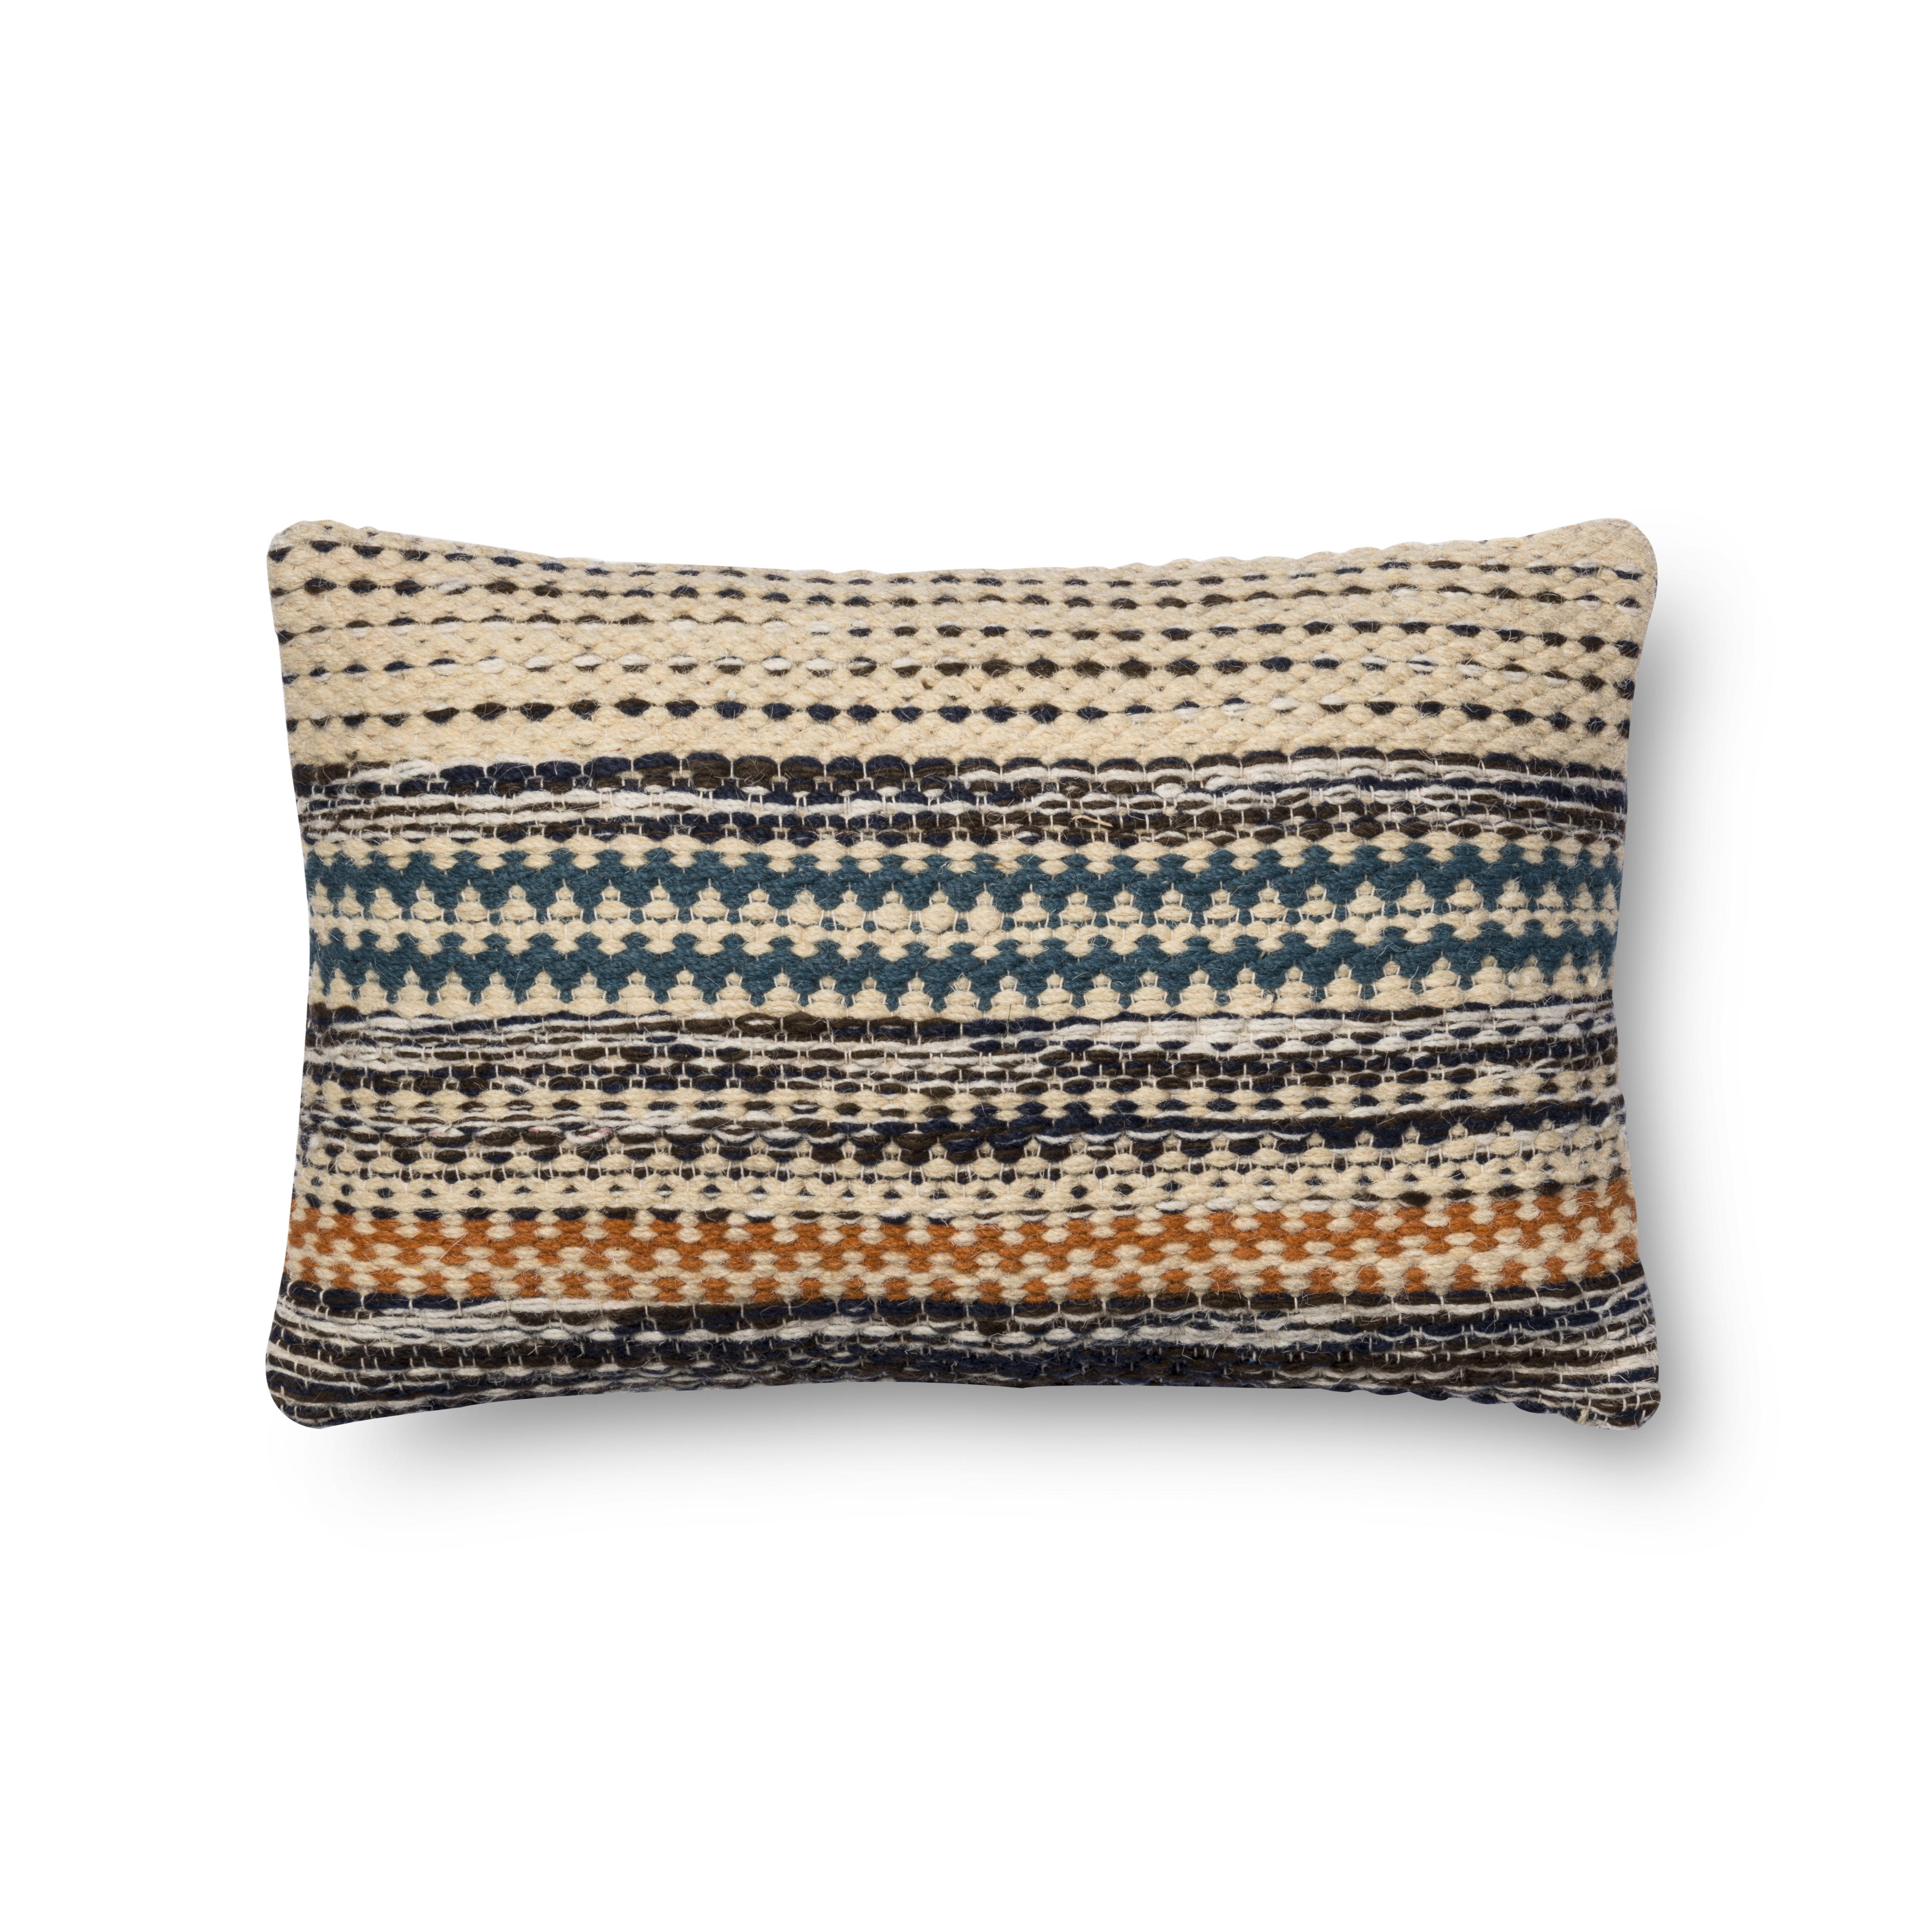 Magnolia Home by Joanna Gaines x Loloi Pillows P1009 Orange / Blue 13" x 21" Cover Only - Image 0